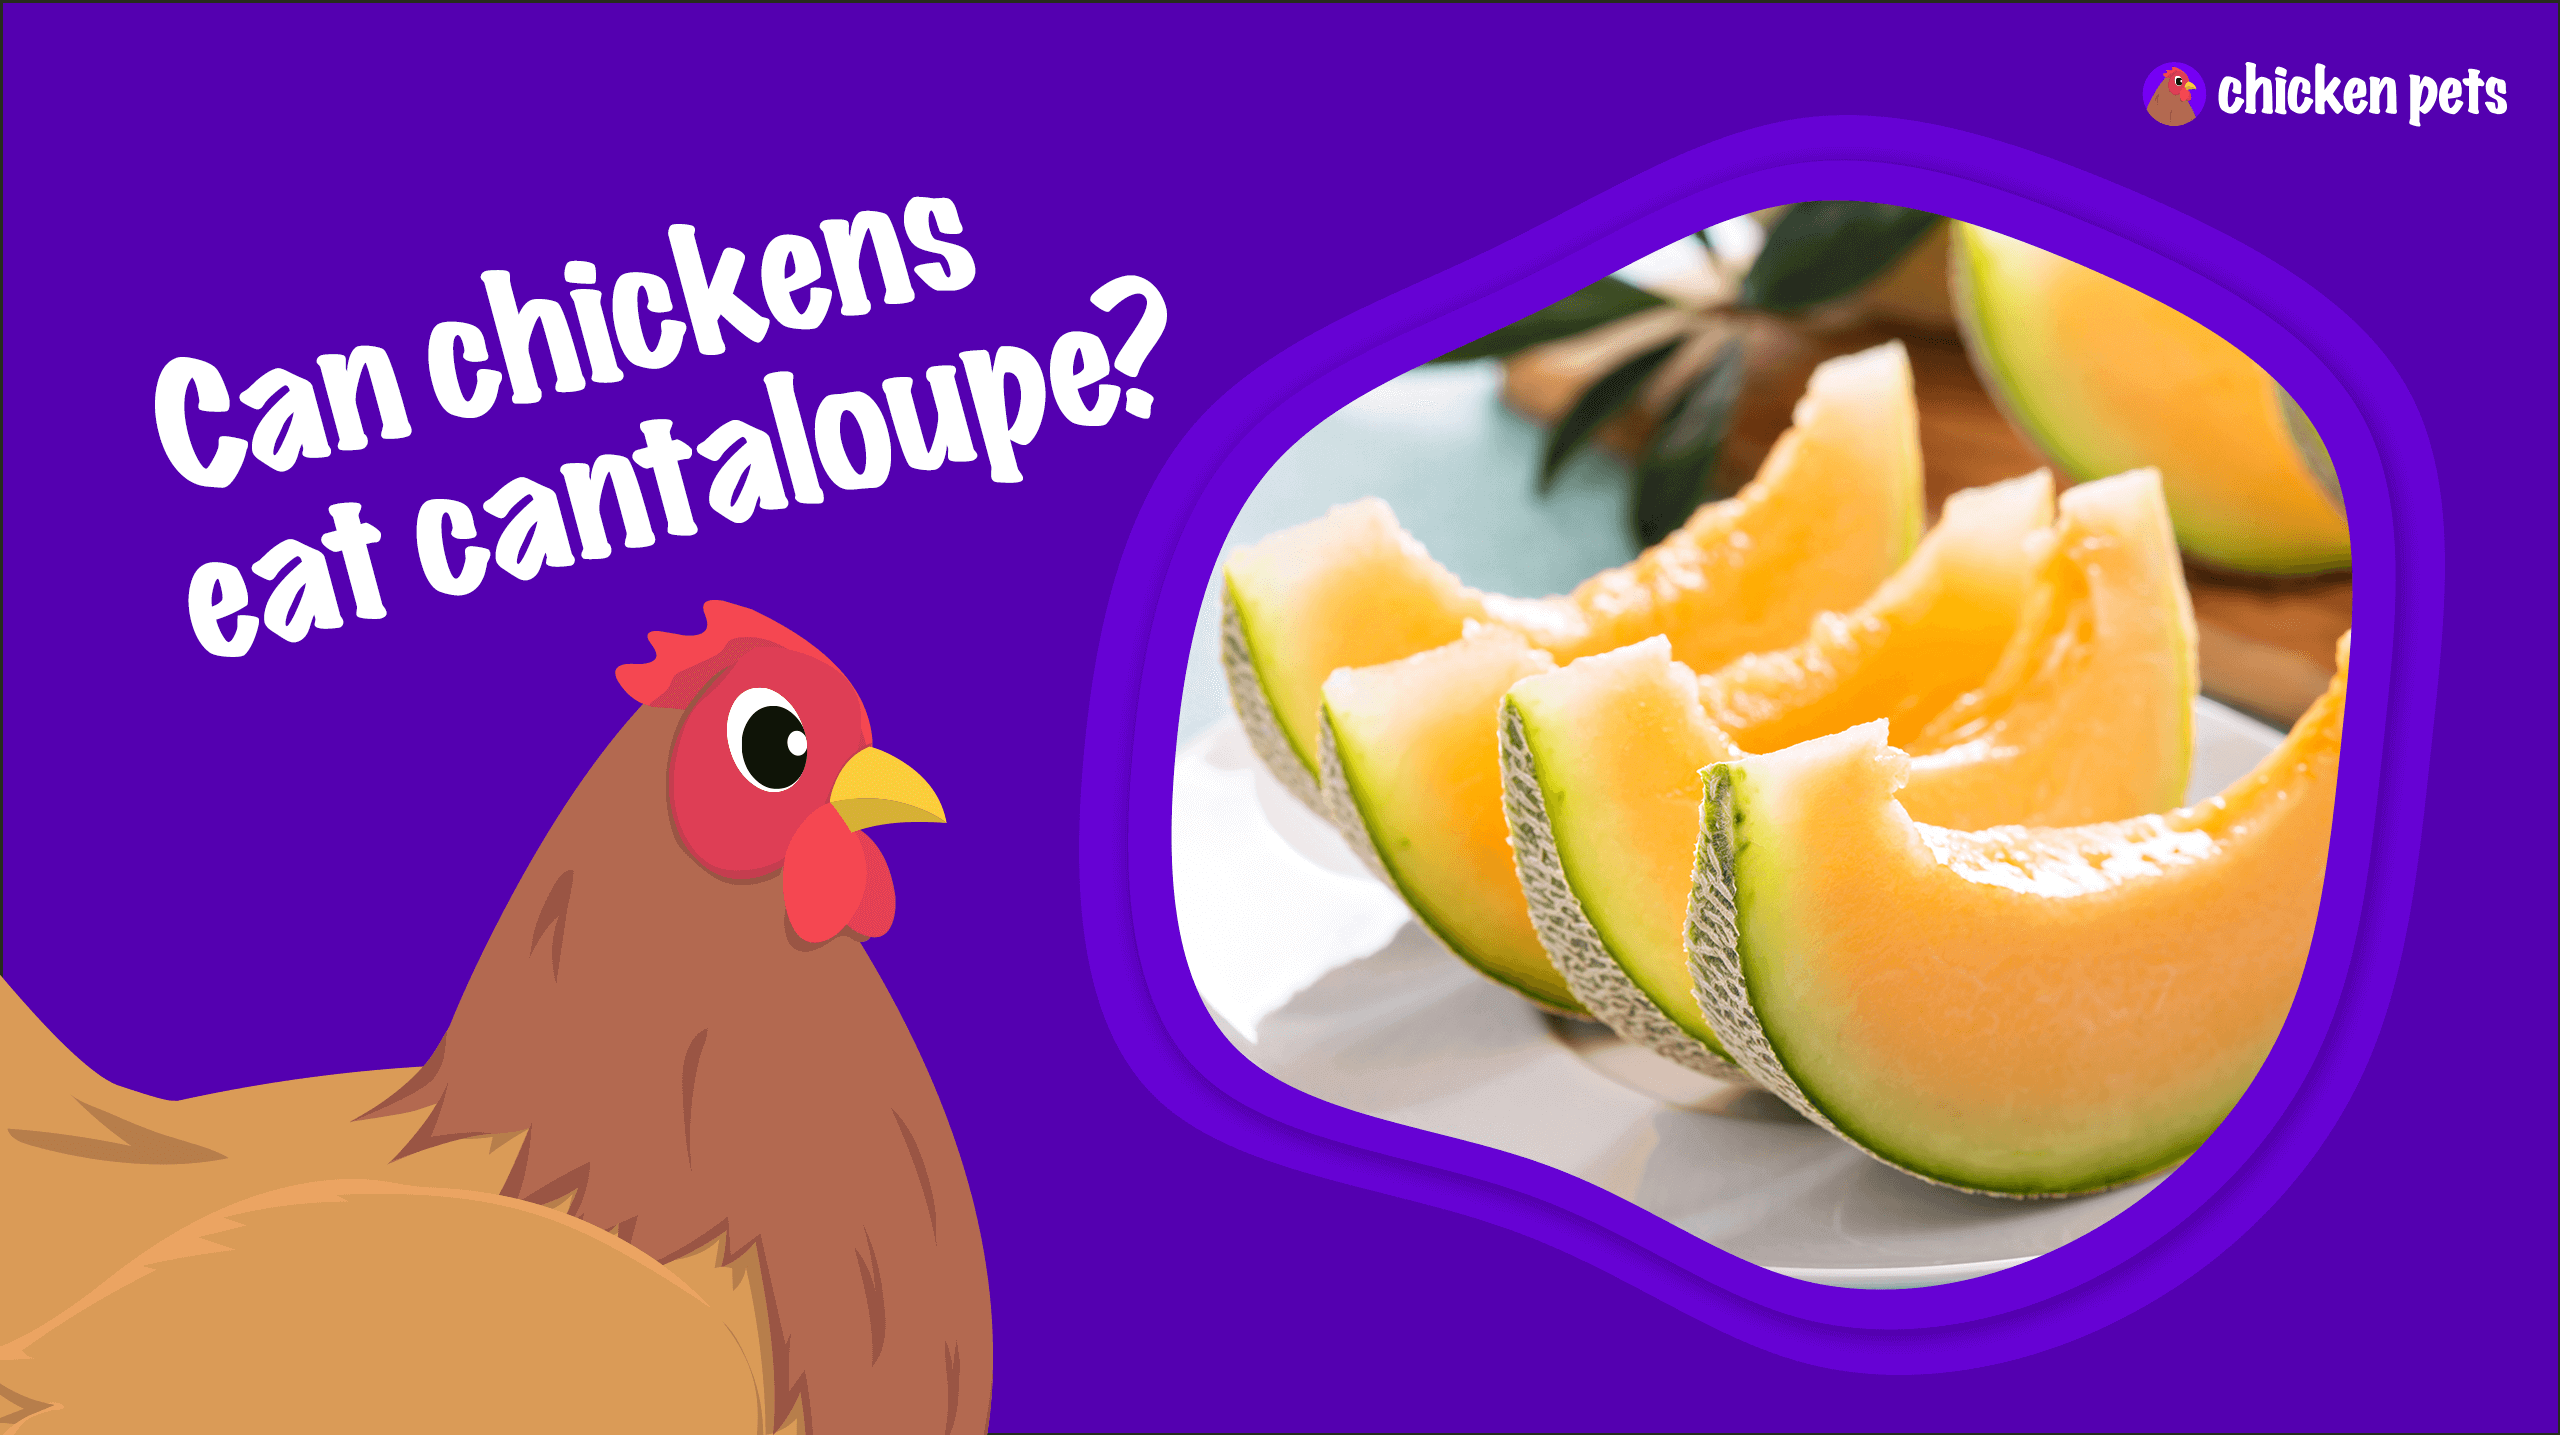 Can chickens eat cantaloupe?